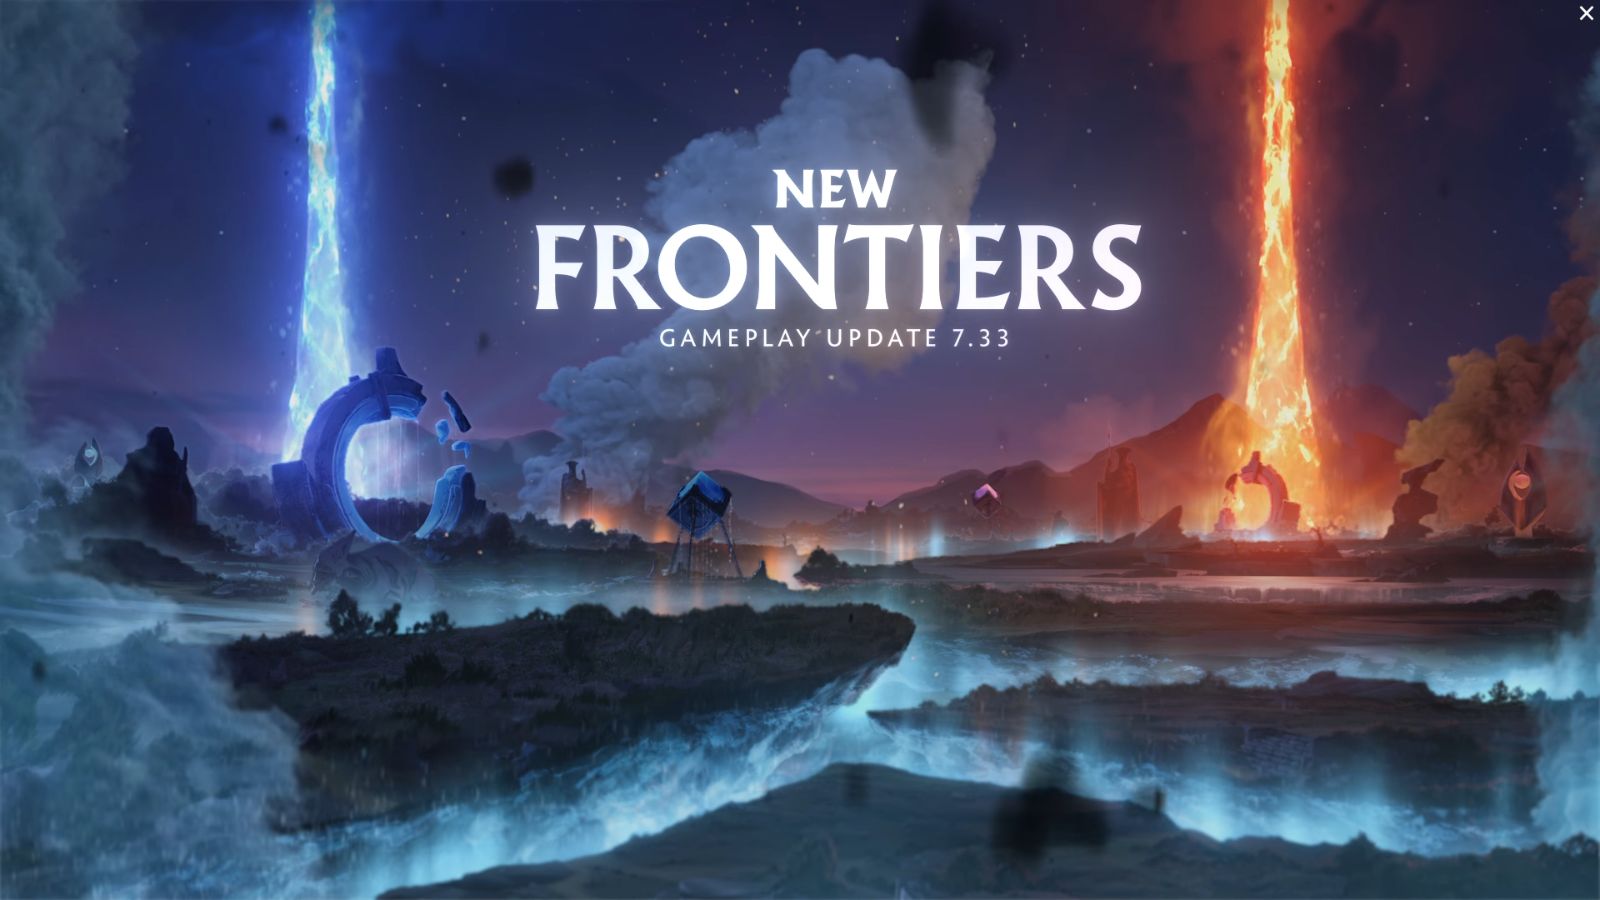 Dota 2 patch 7.33 New Frontiers update